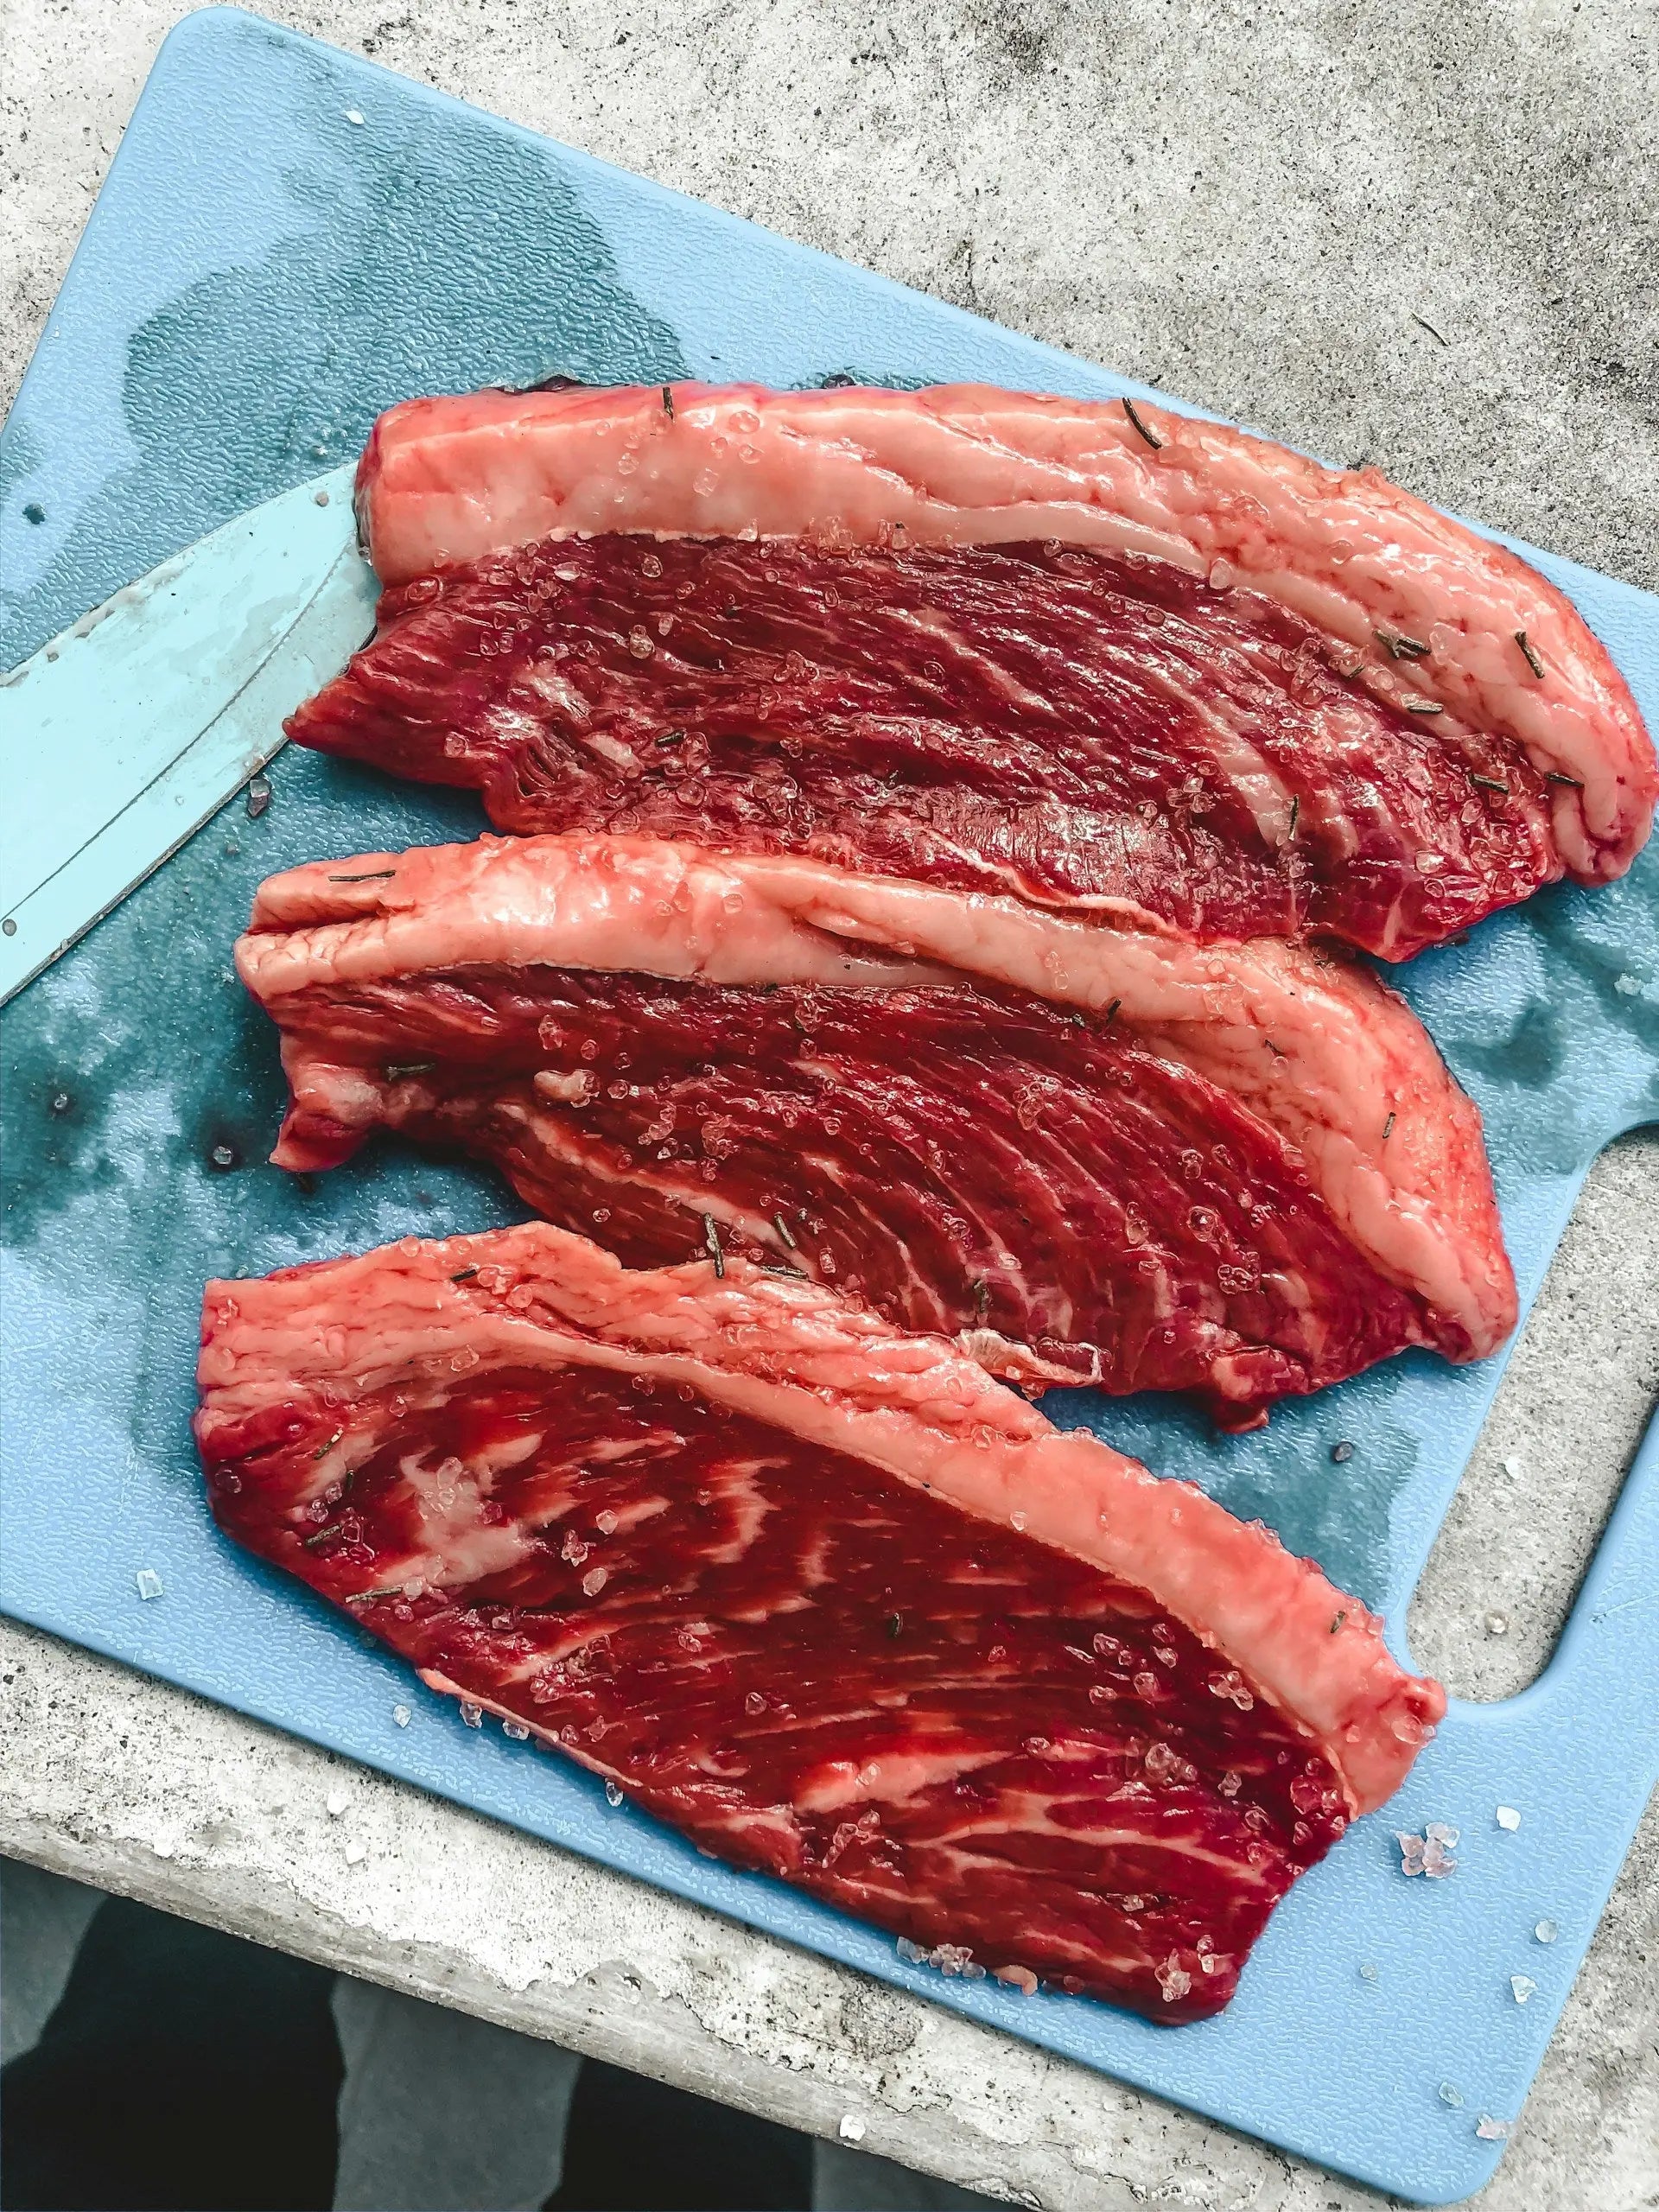 How-Long-Can-Red-Meat-Stay-In-The-Fridge | Fridge.com